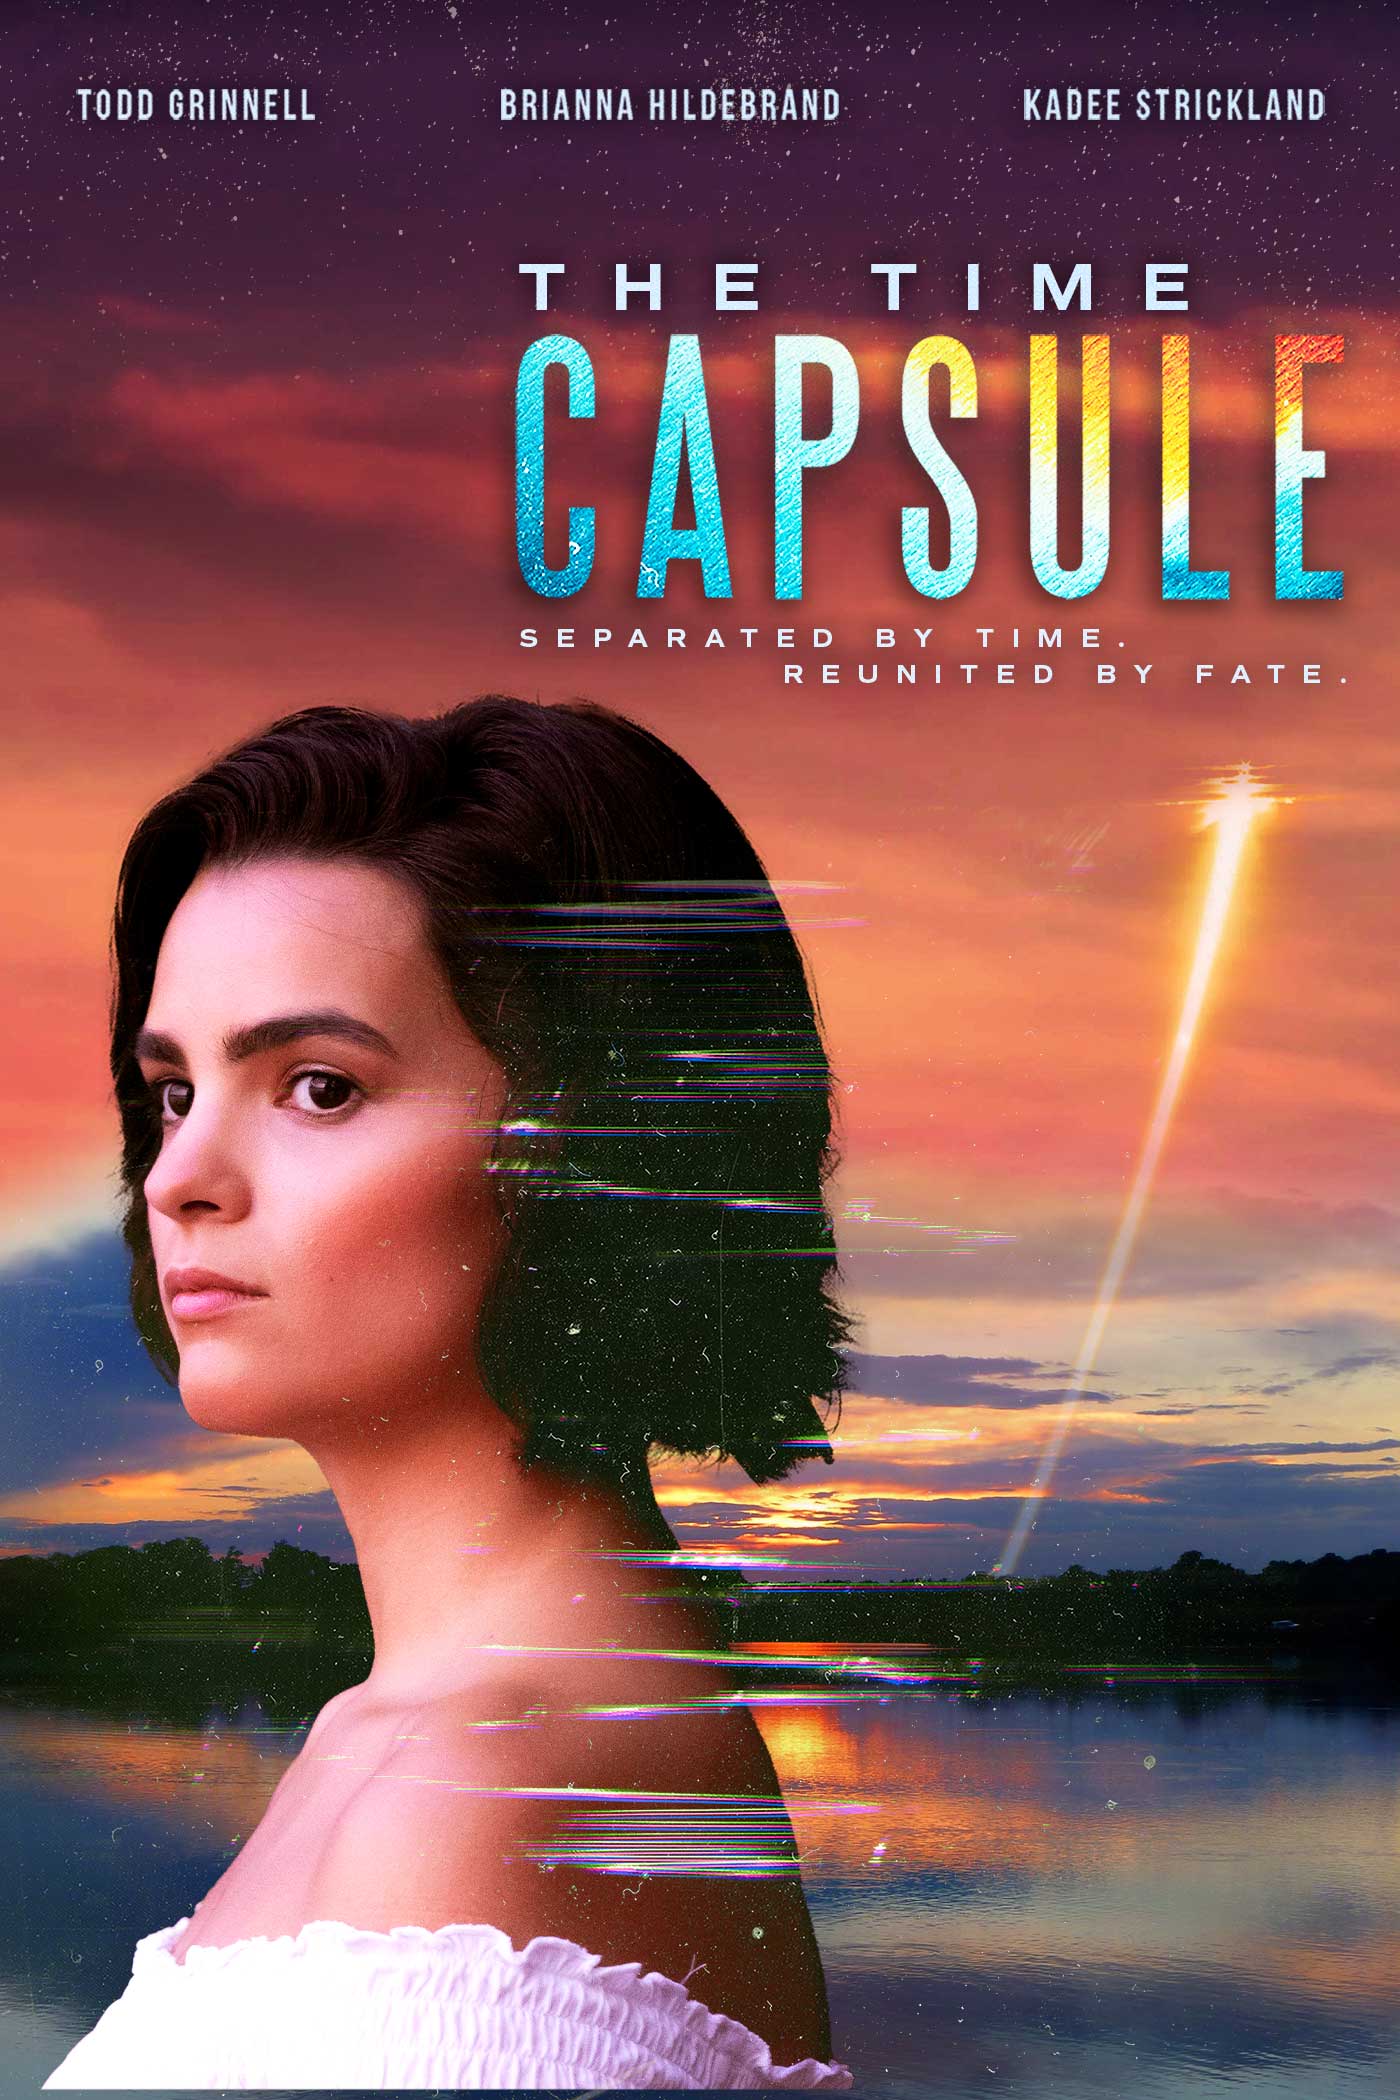 THE TIME CAPSULE DVD